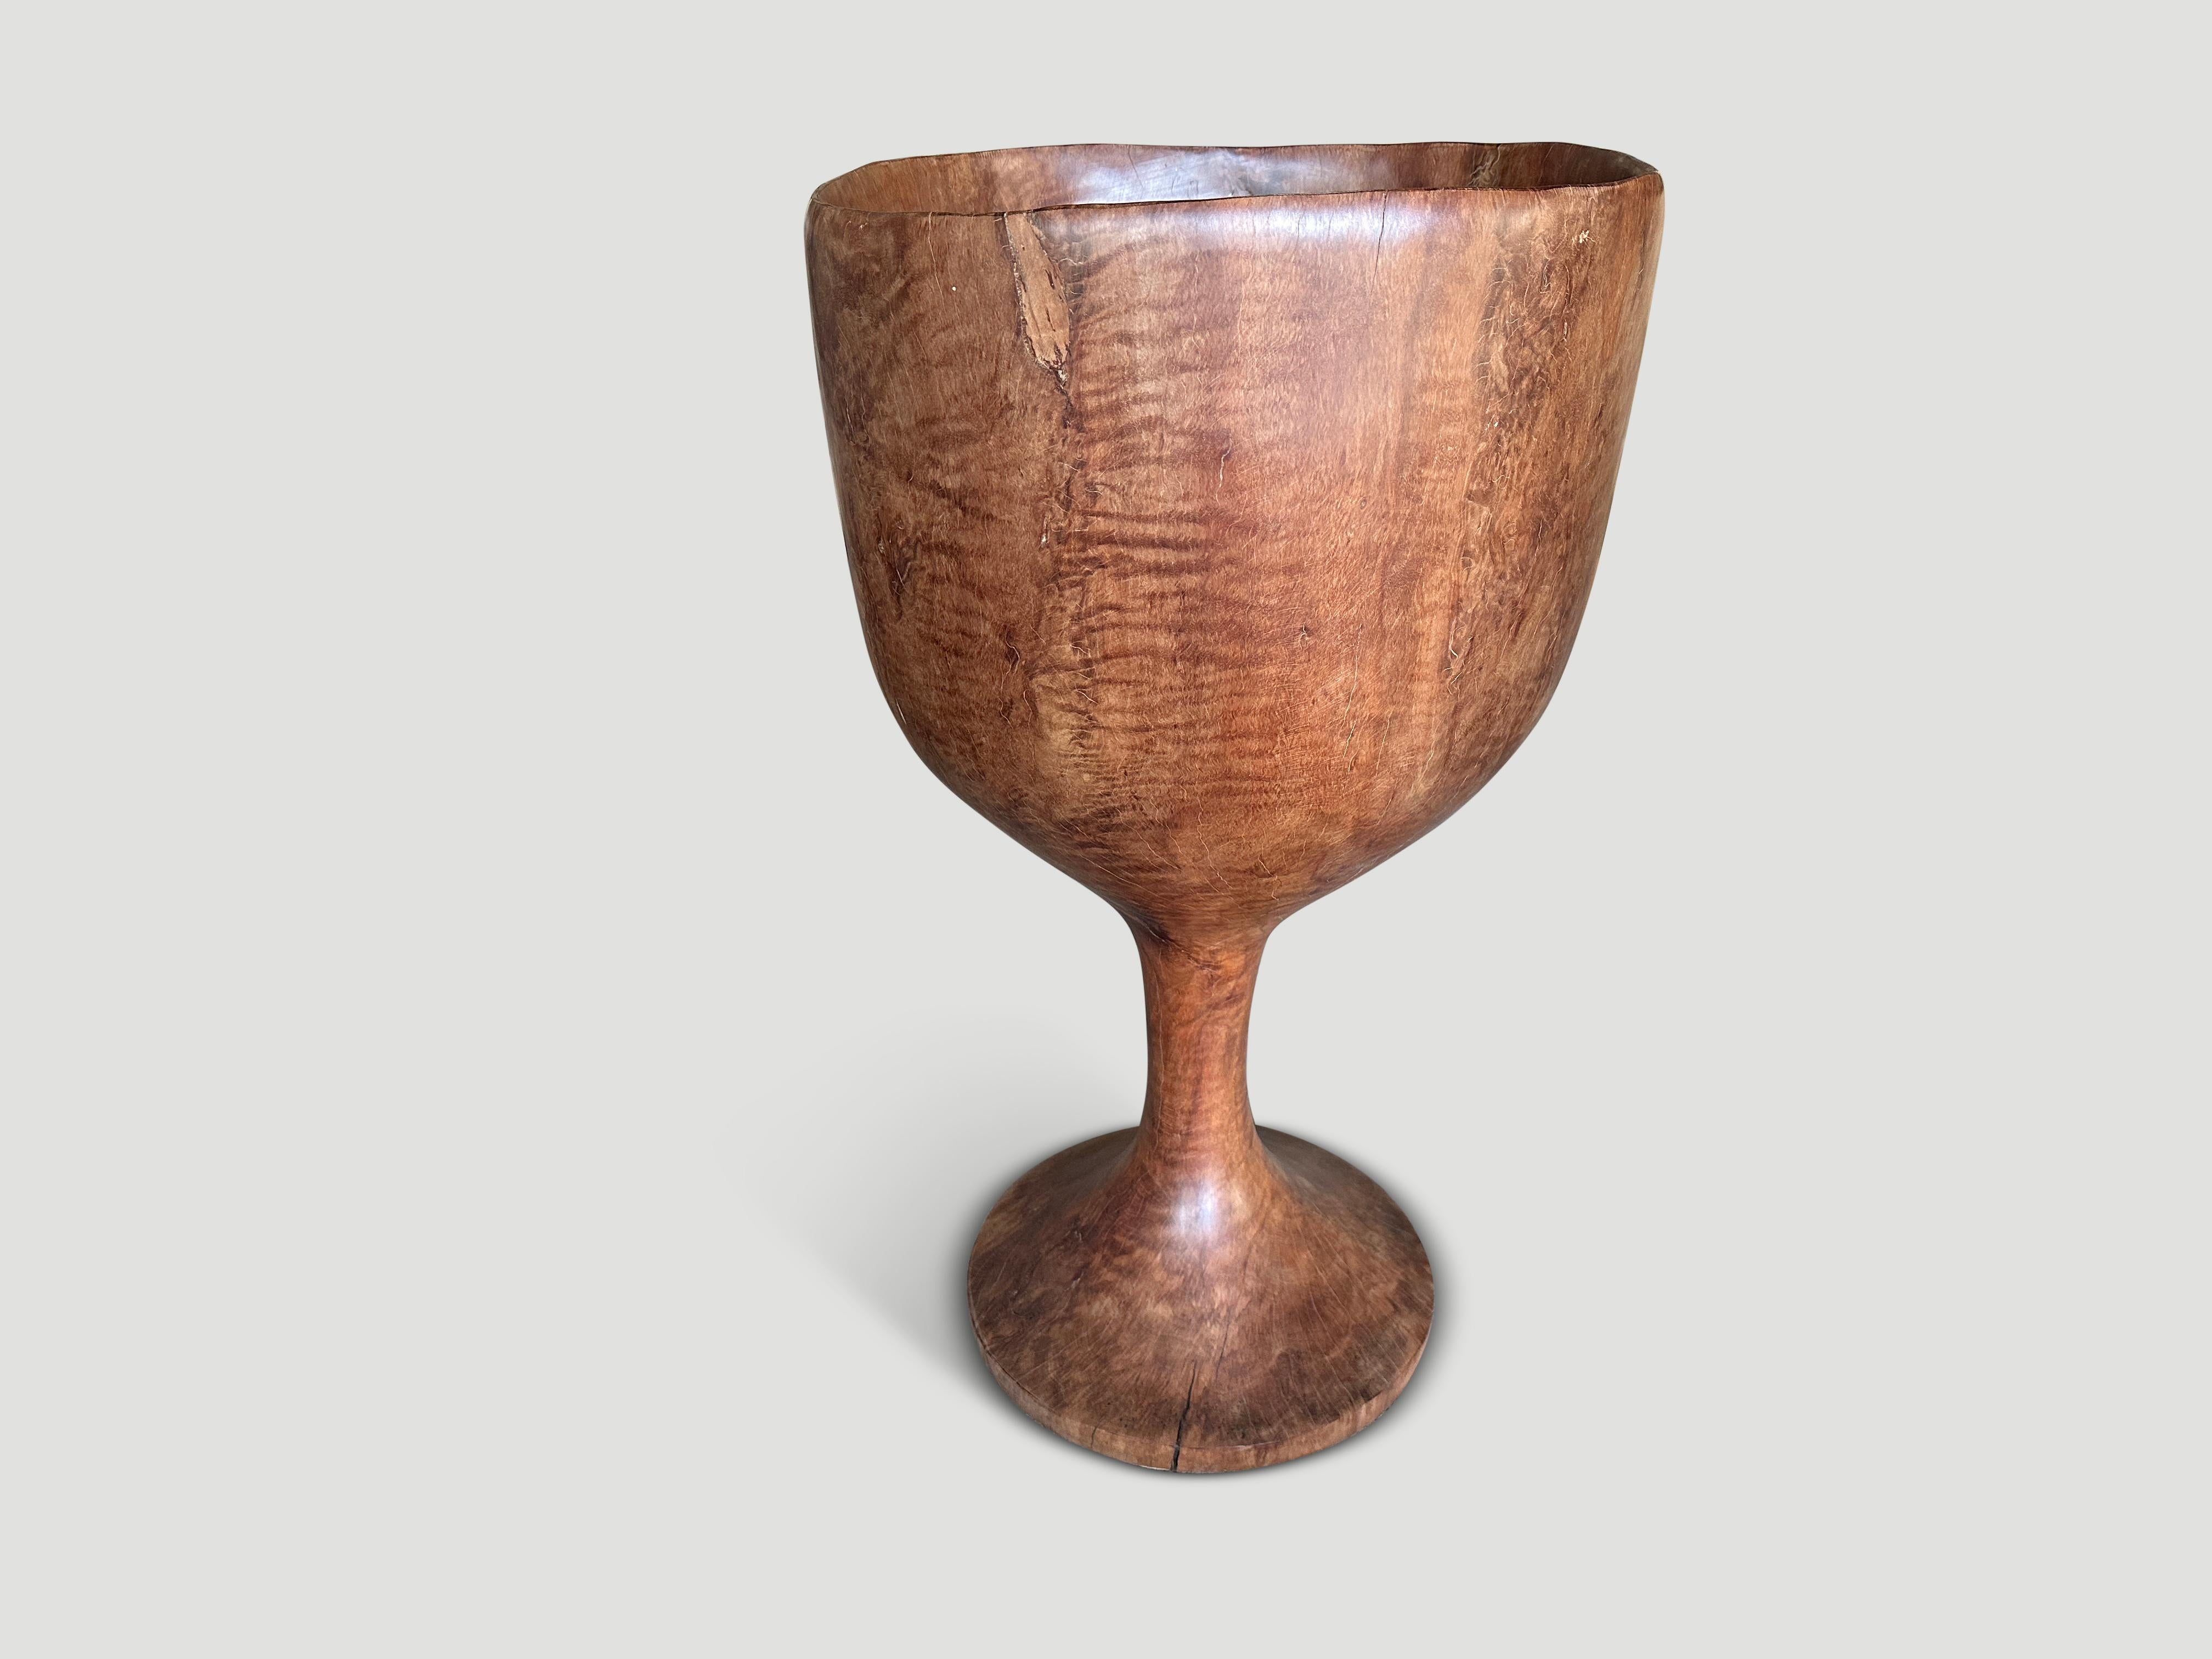 Sculptural vessel hand carved from a single reclaimed block of lychee wood. Great as an art object, holding towels by a pool perhaps or as a planter. Both usable and sculptural. Finished with a natural oil revealing the beautiful wood grain. Full